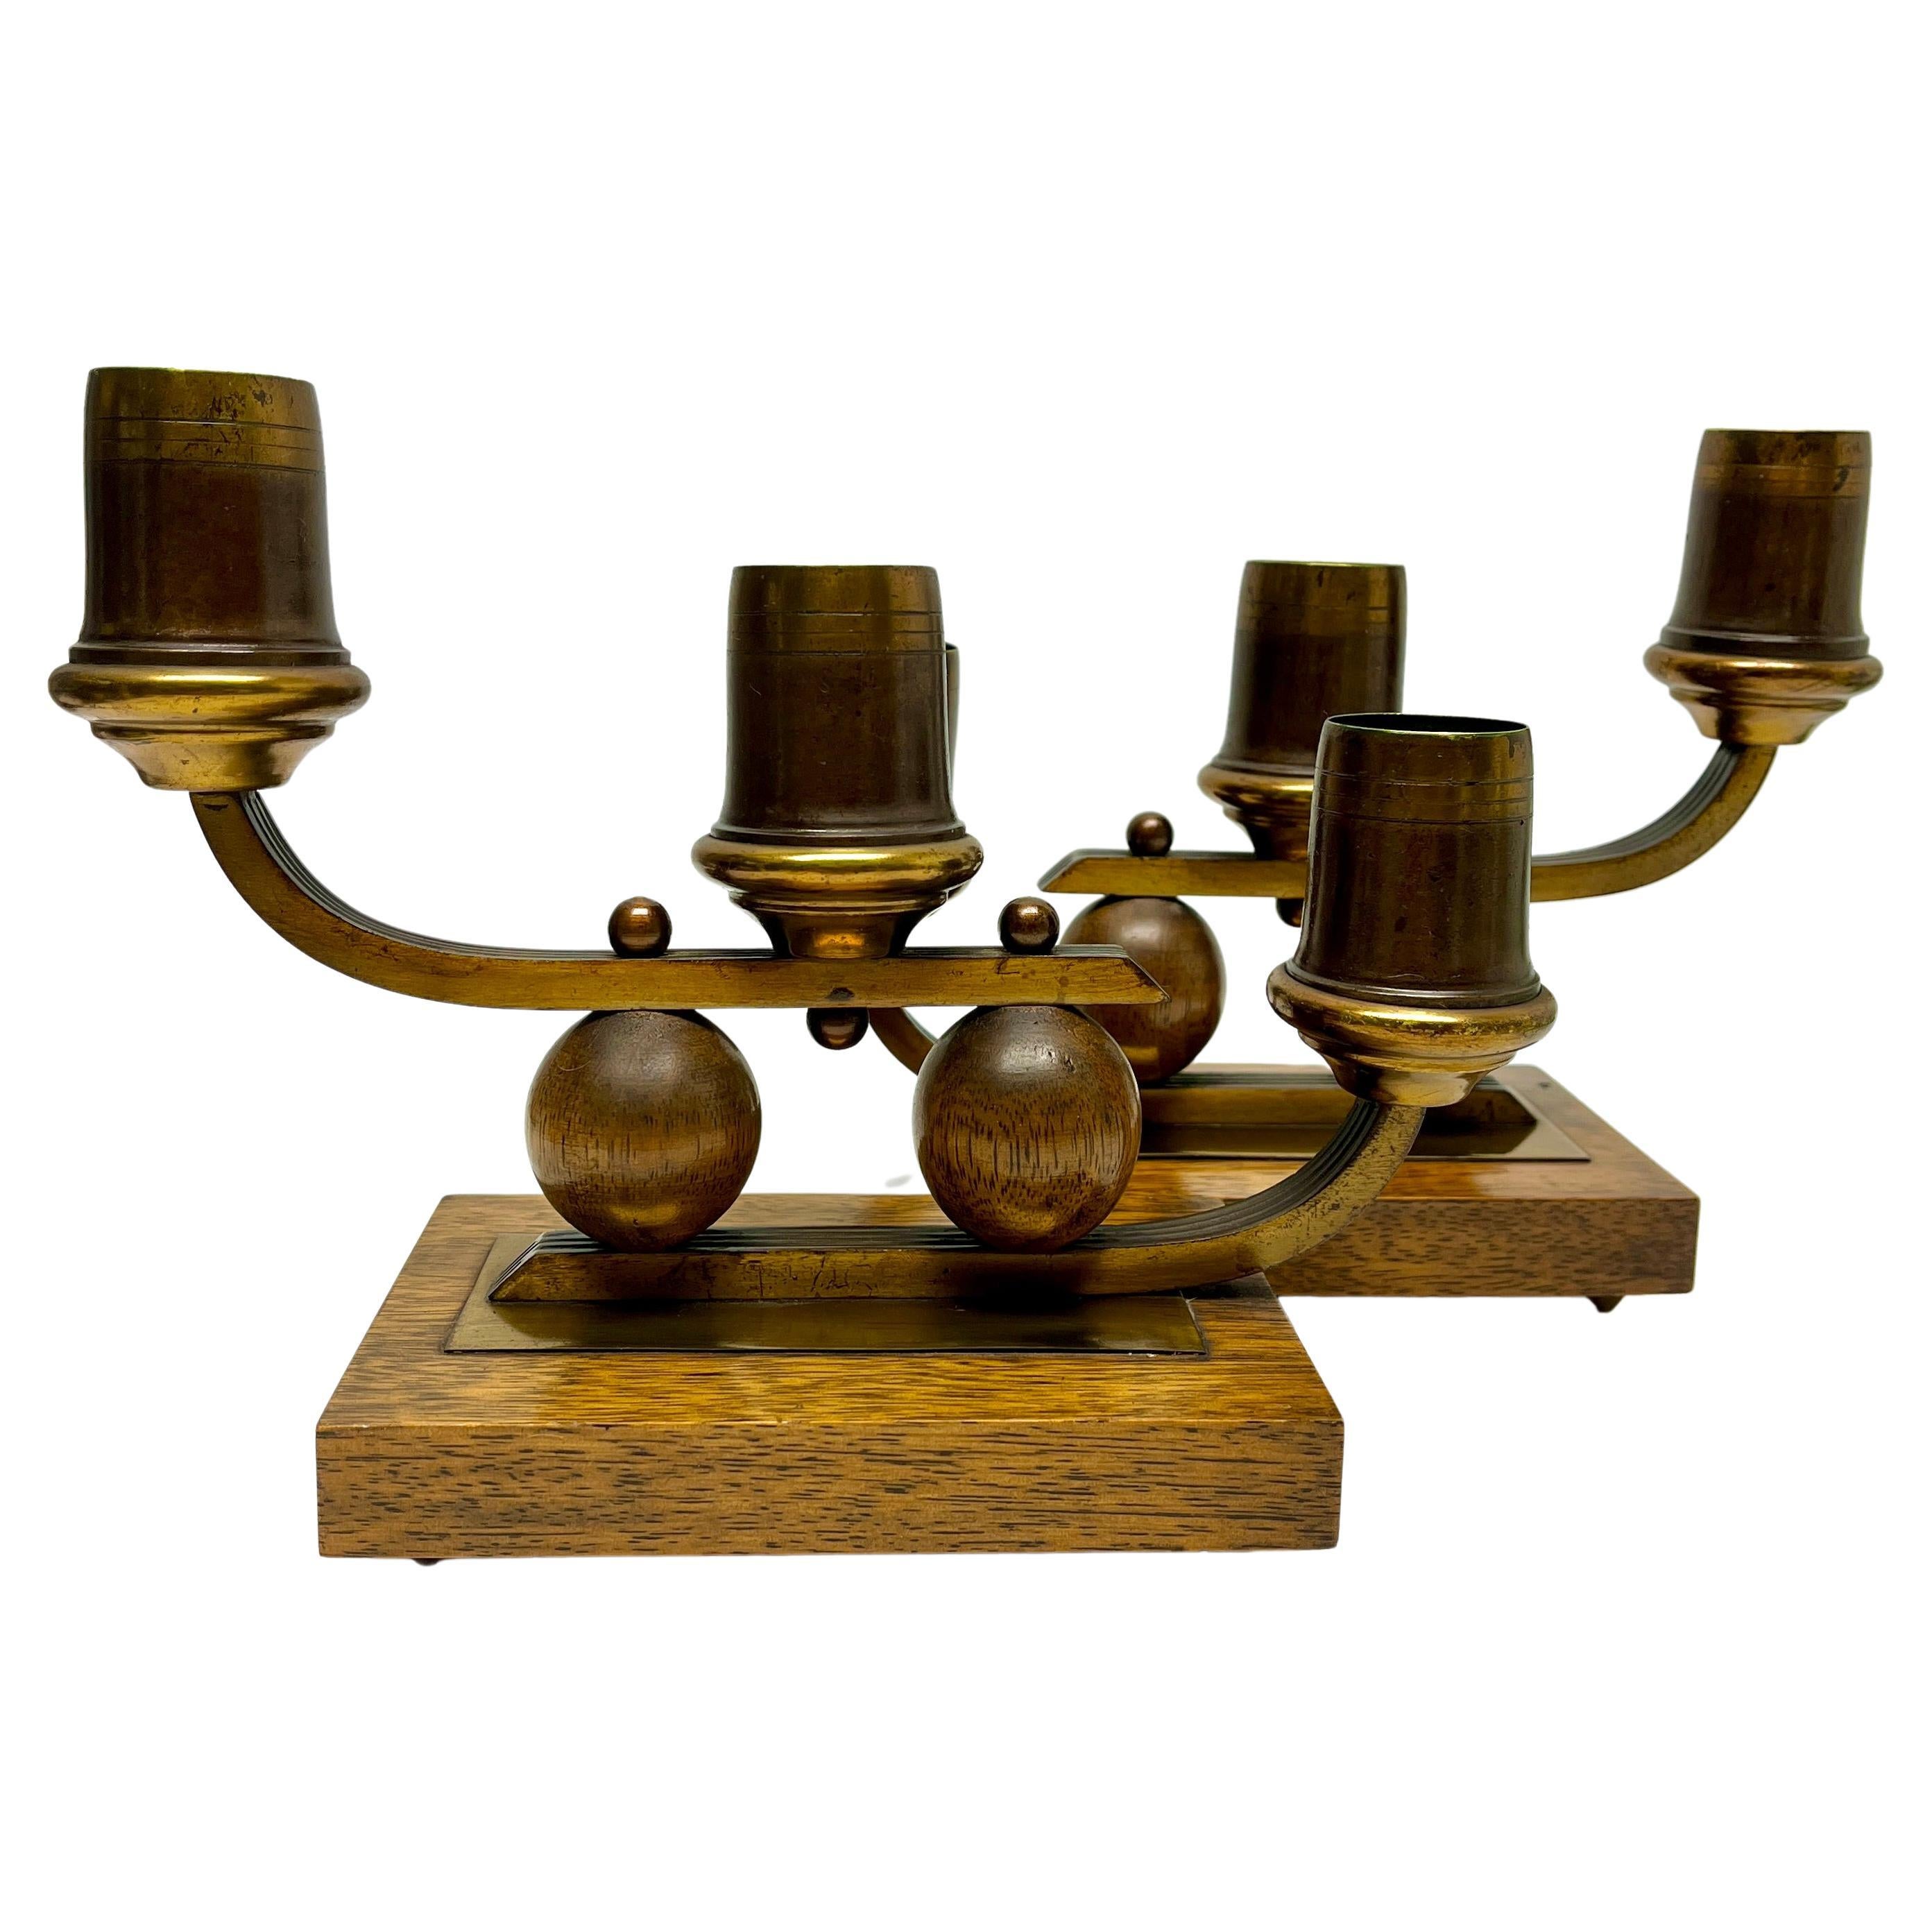 Art Deco Pair of Wooden Base and Brass Candlesticks whit Wooden Details, 1930s For Sale